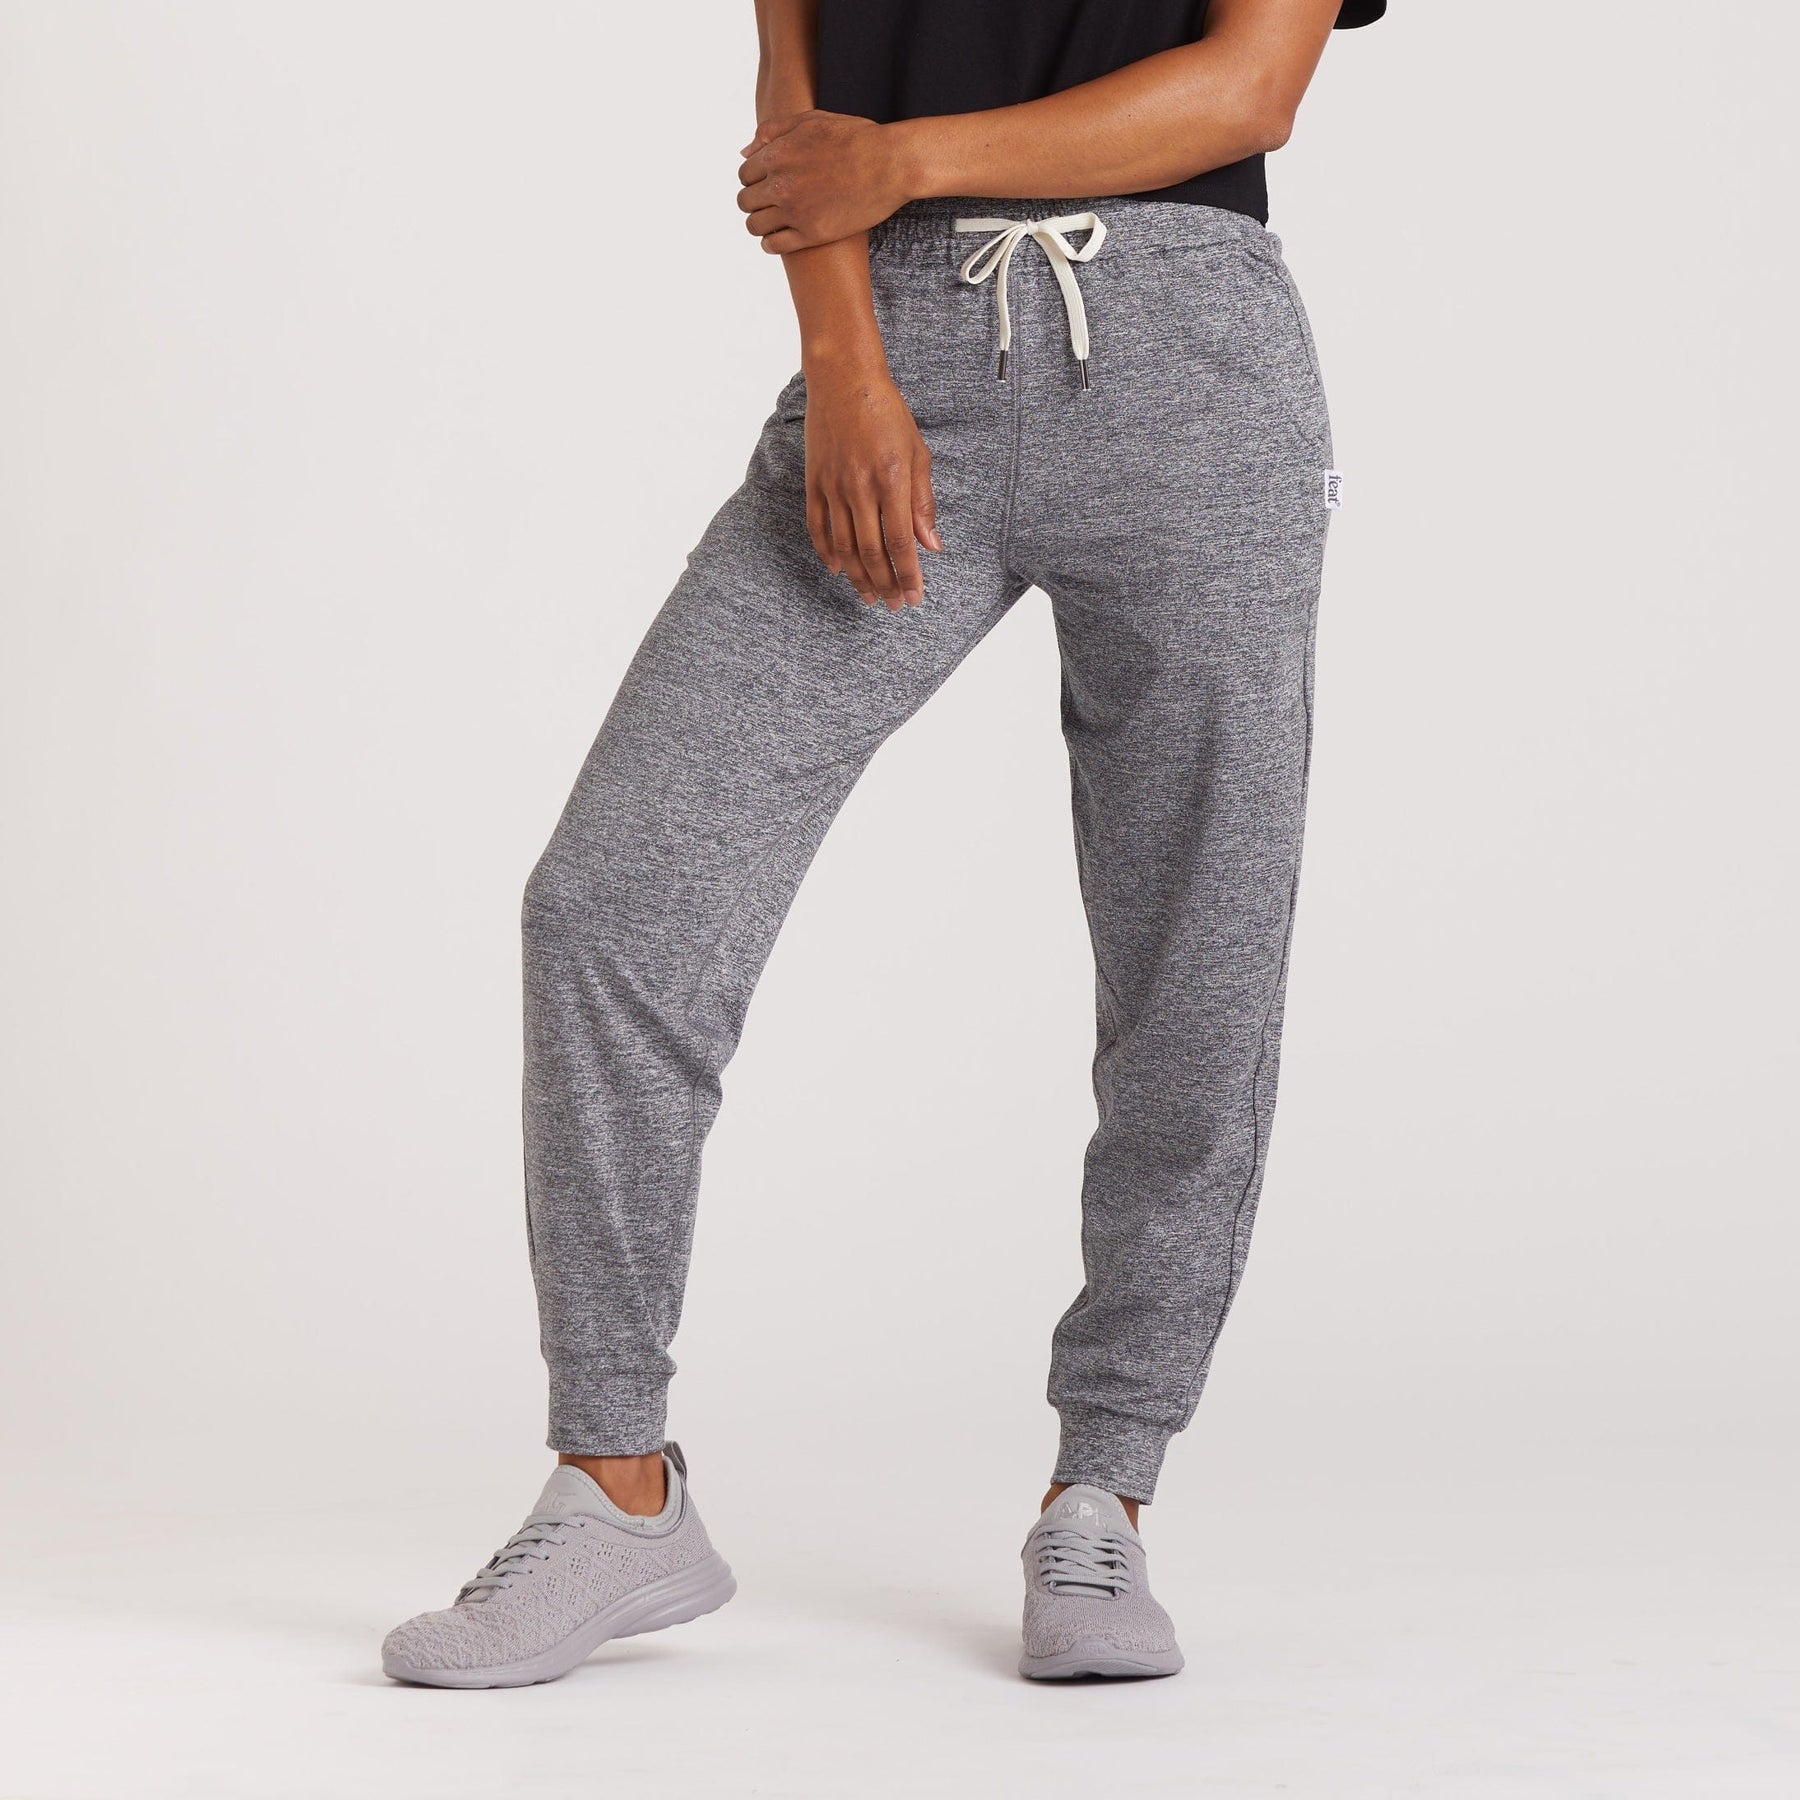 Leggings Women's Relaxed-Fit Jogger Track Cuff Sweatpants With